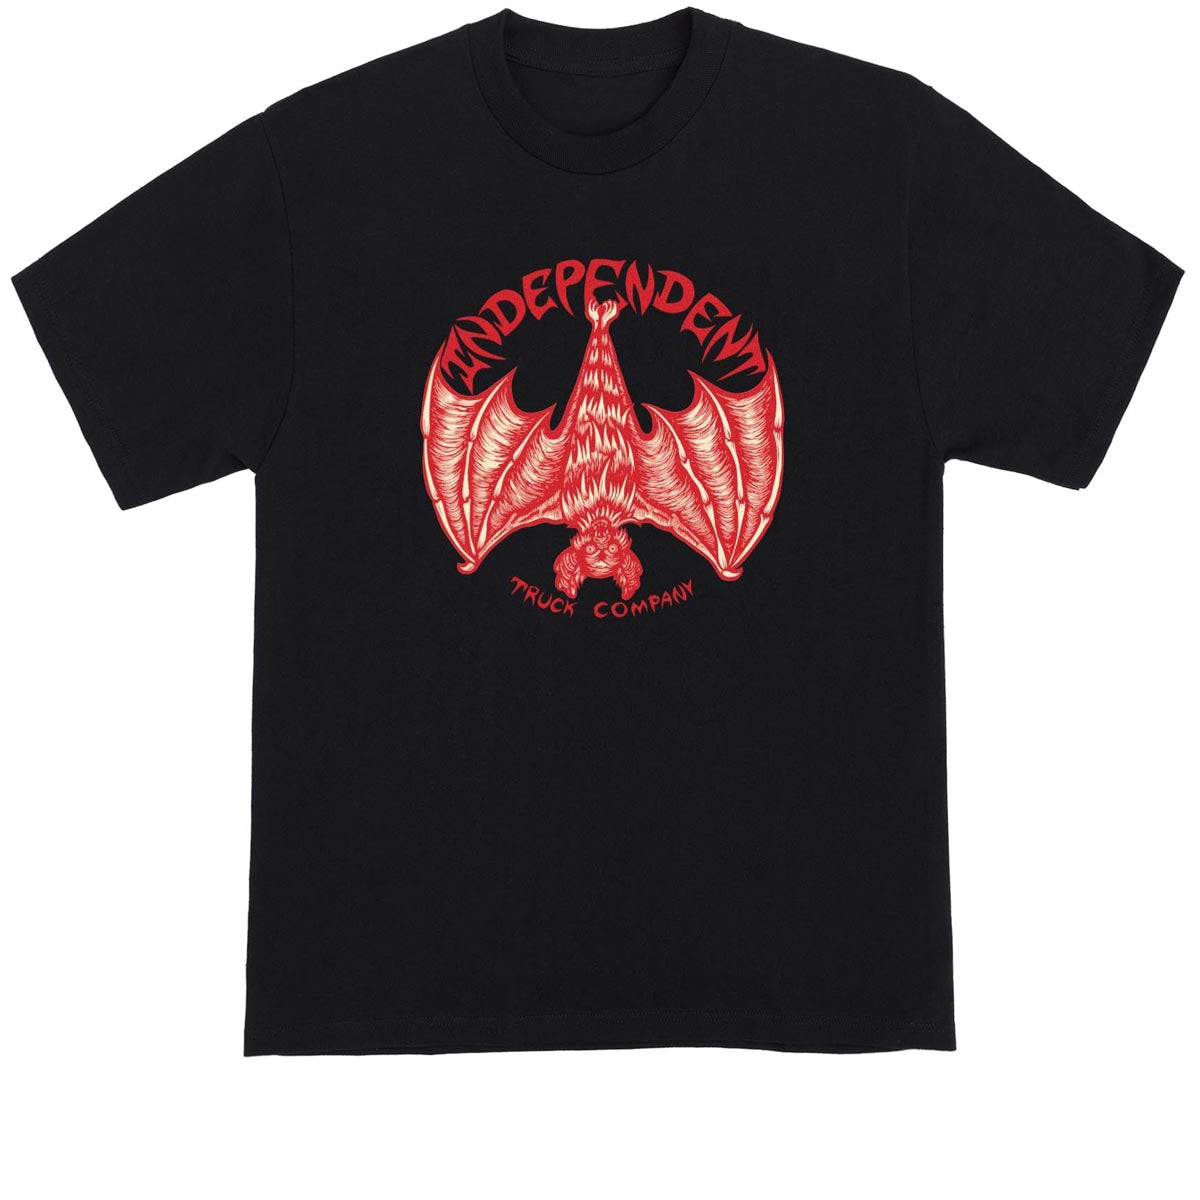 Independent Night Prowlers T-Shirt - Black image 1